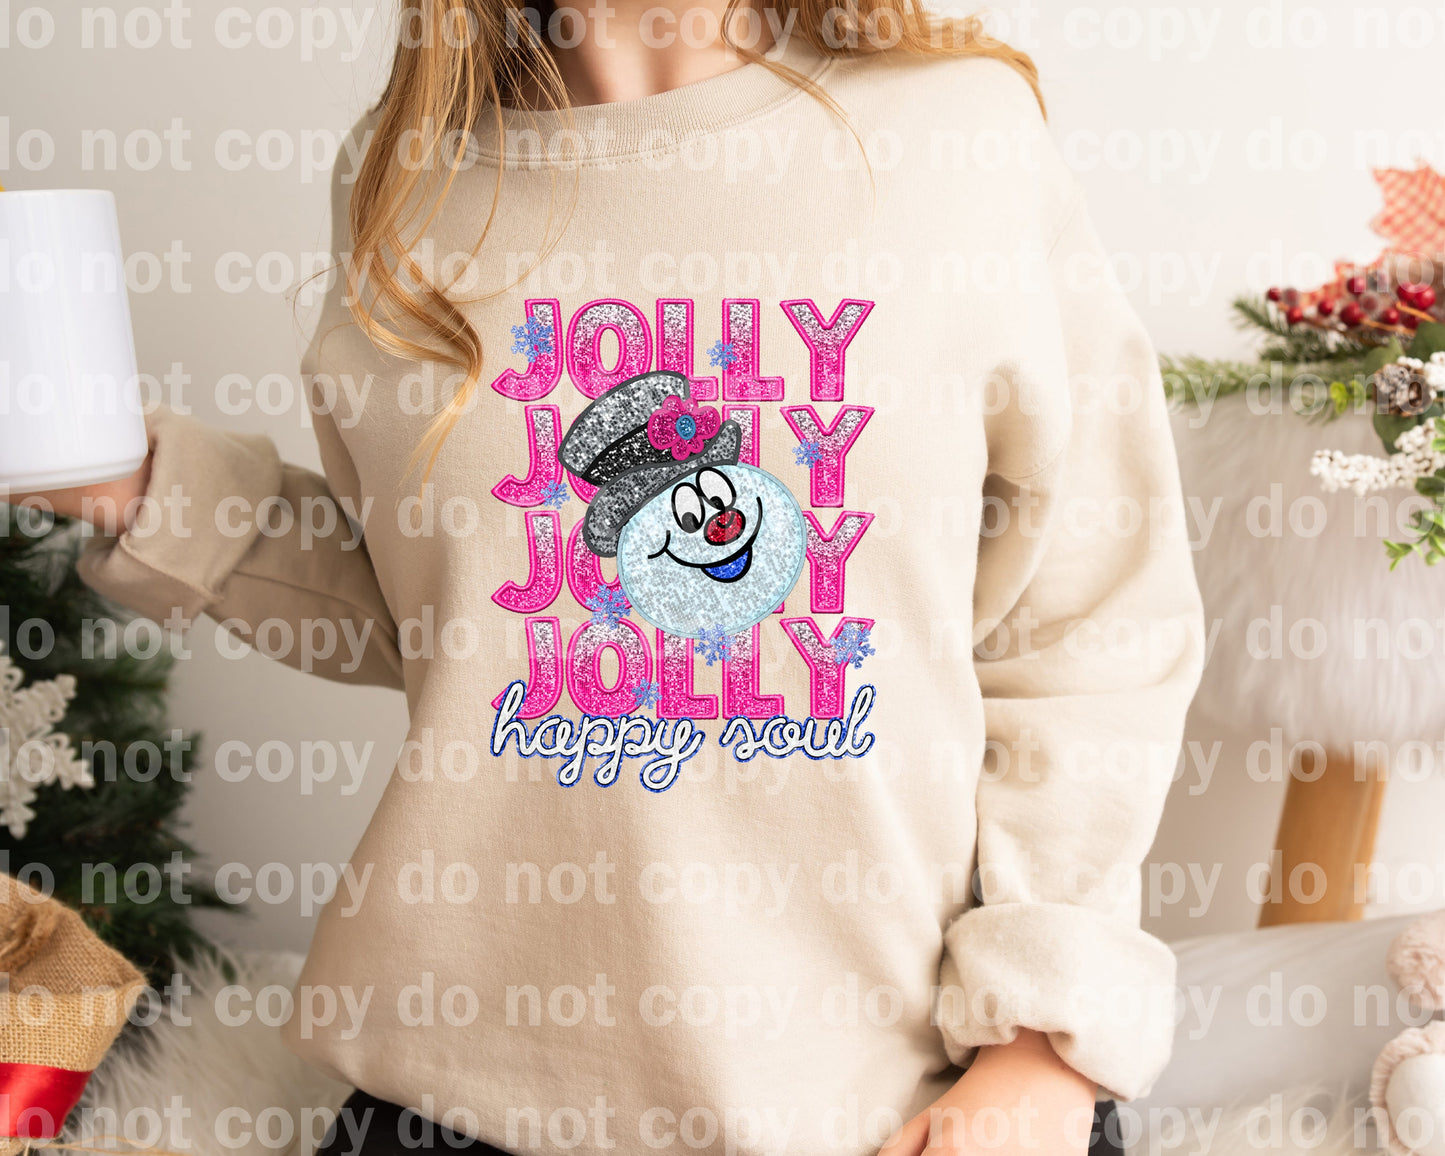 Jolly Happy Soul with Optional Sleeve Design Dream Print or Sublimation Print